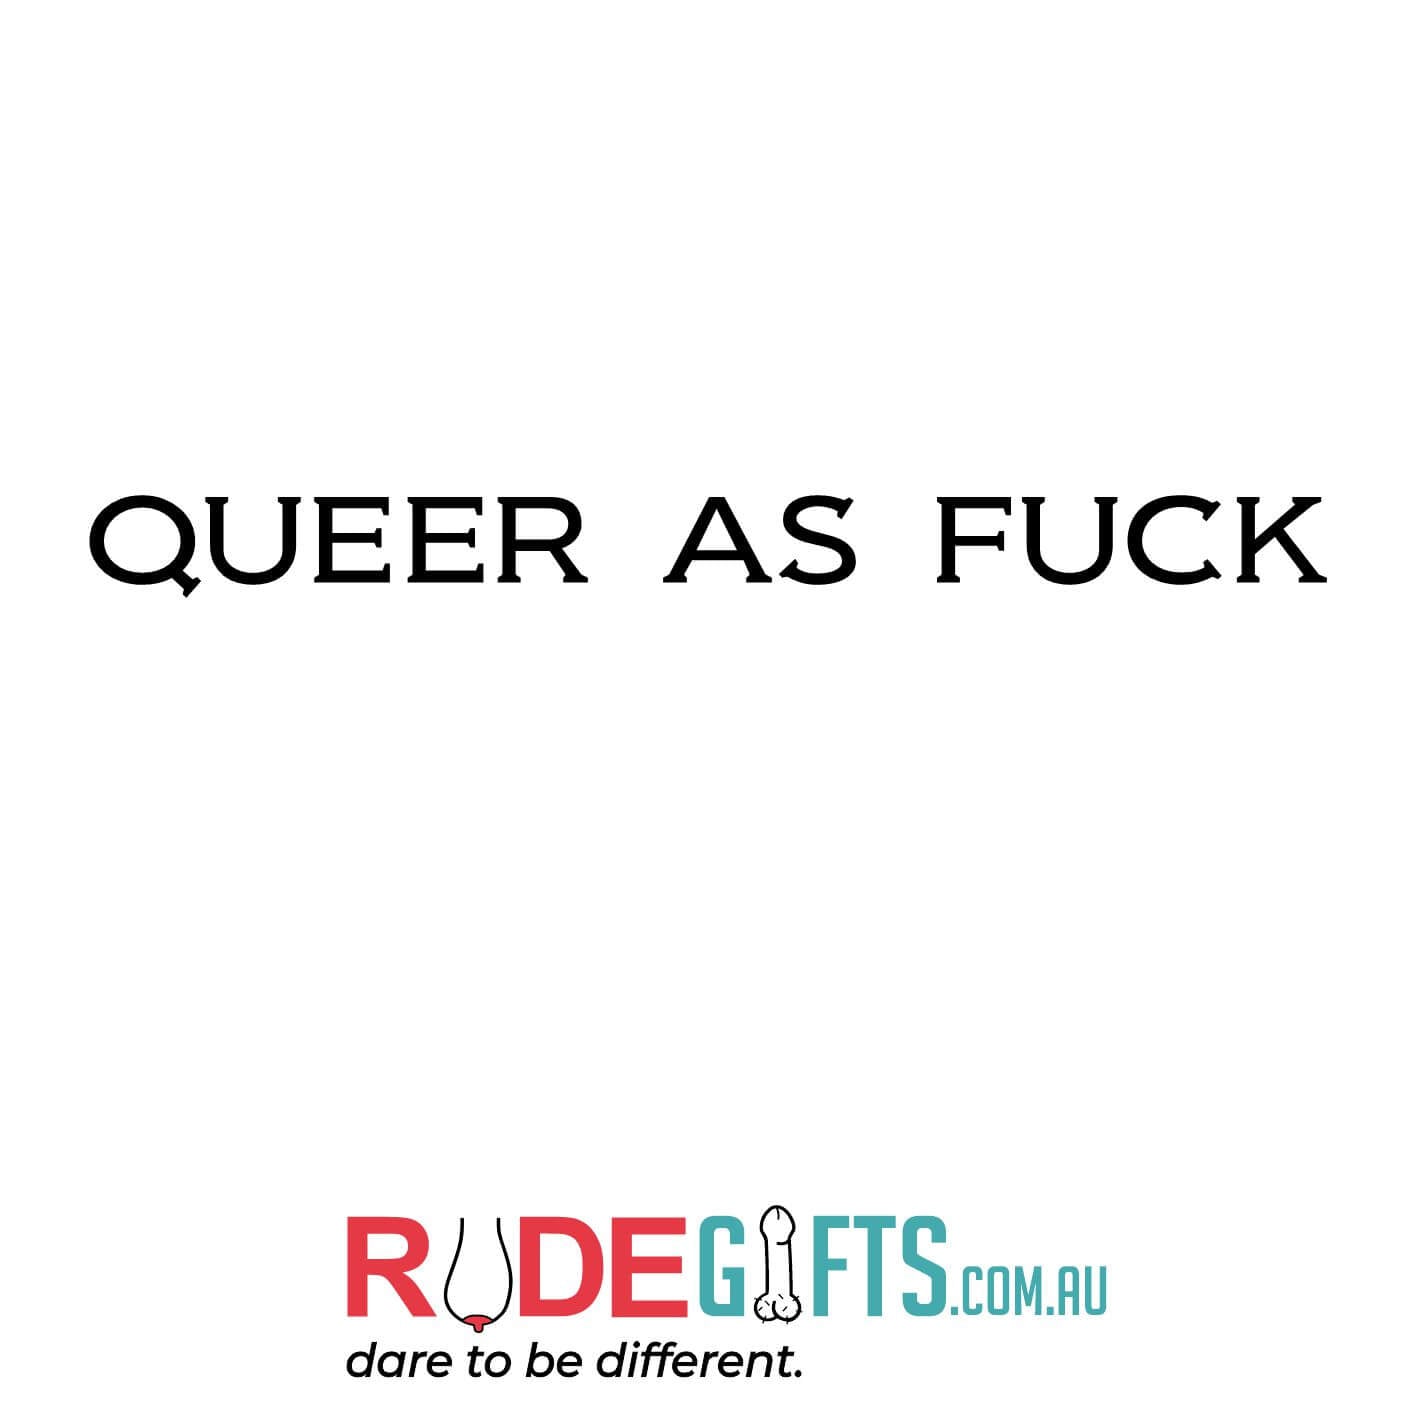 Queer as fuck - 0